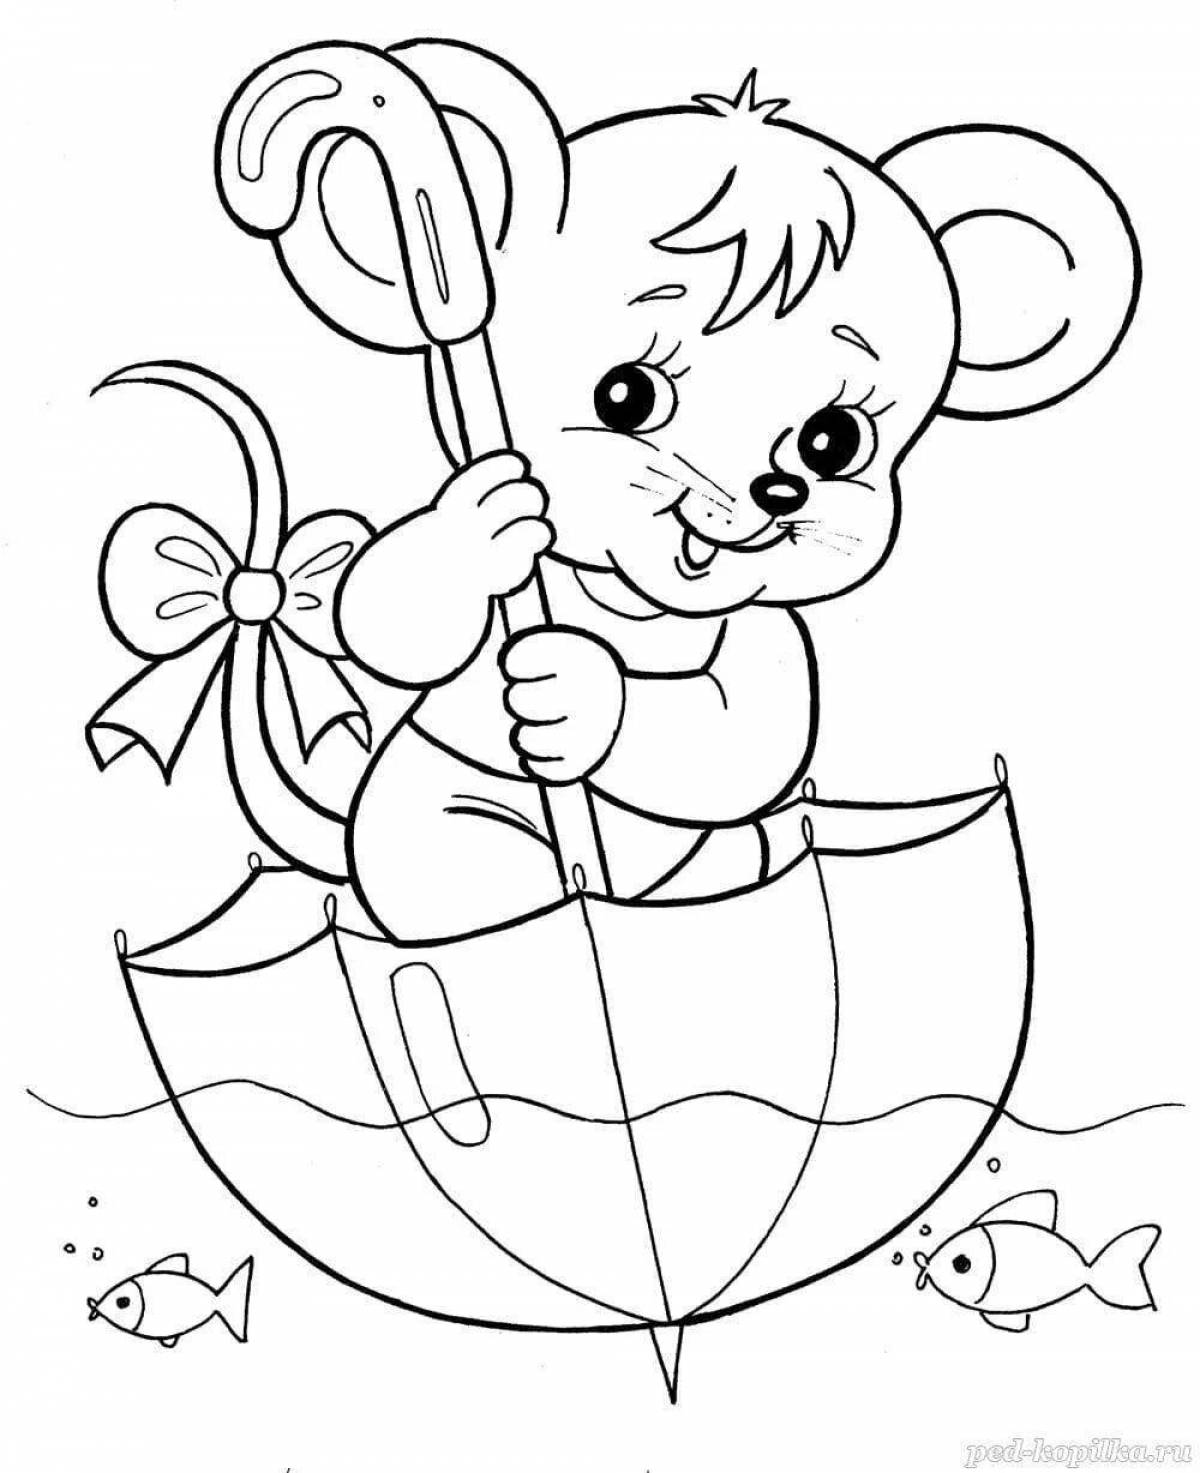 Joyful coloring for kids 5 years old